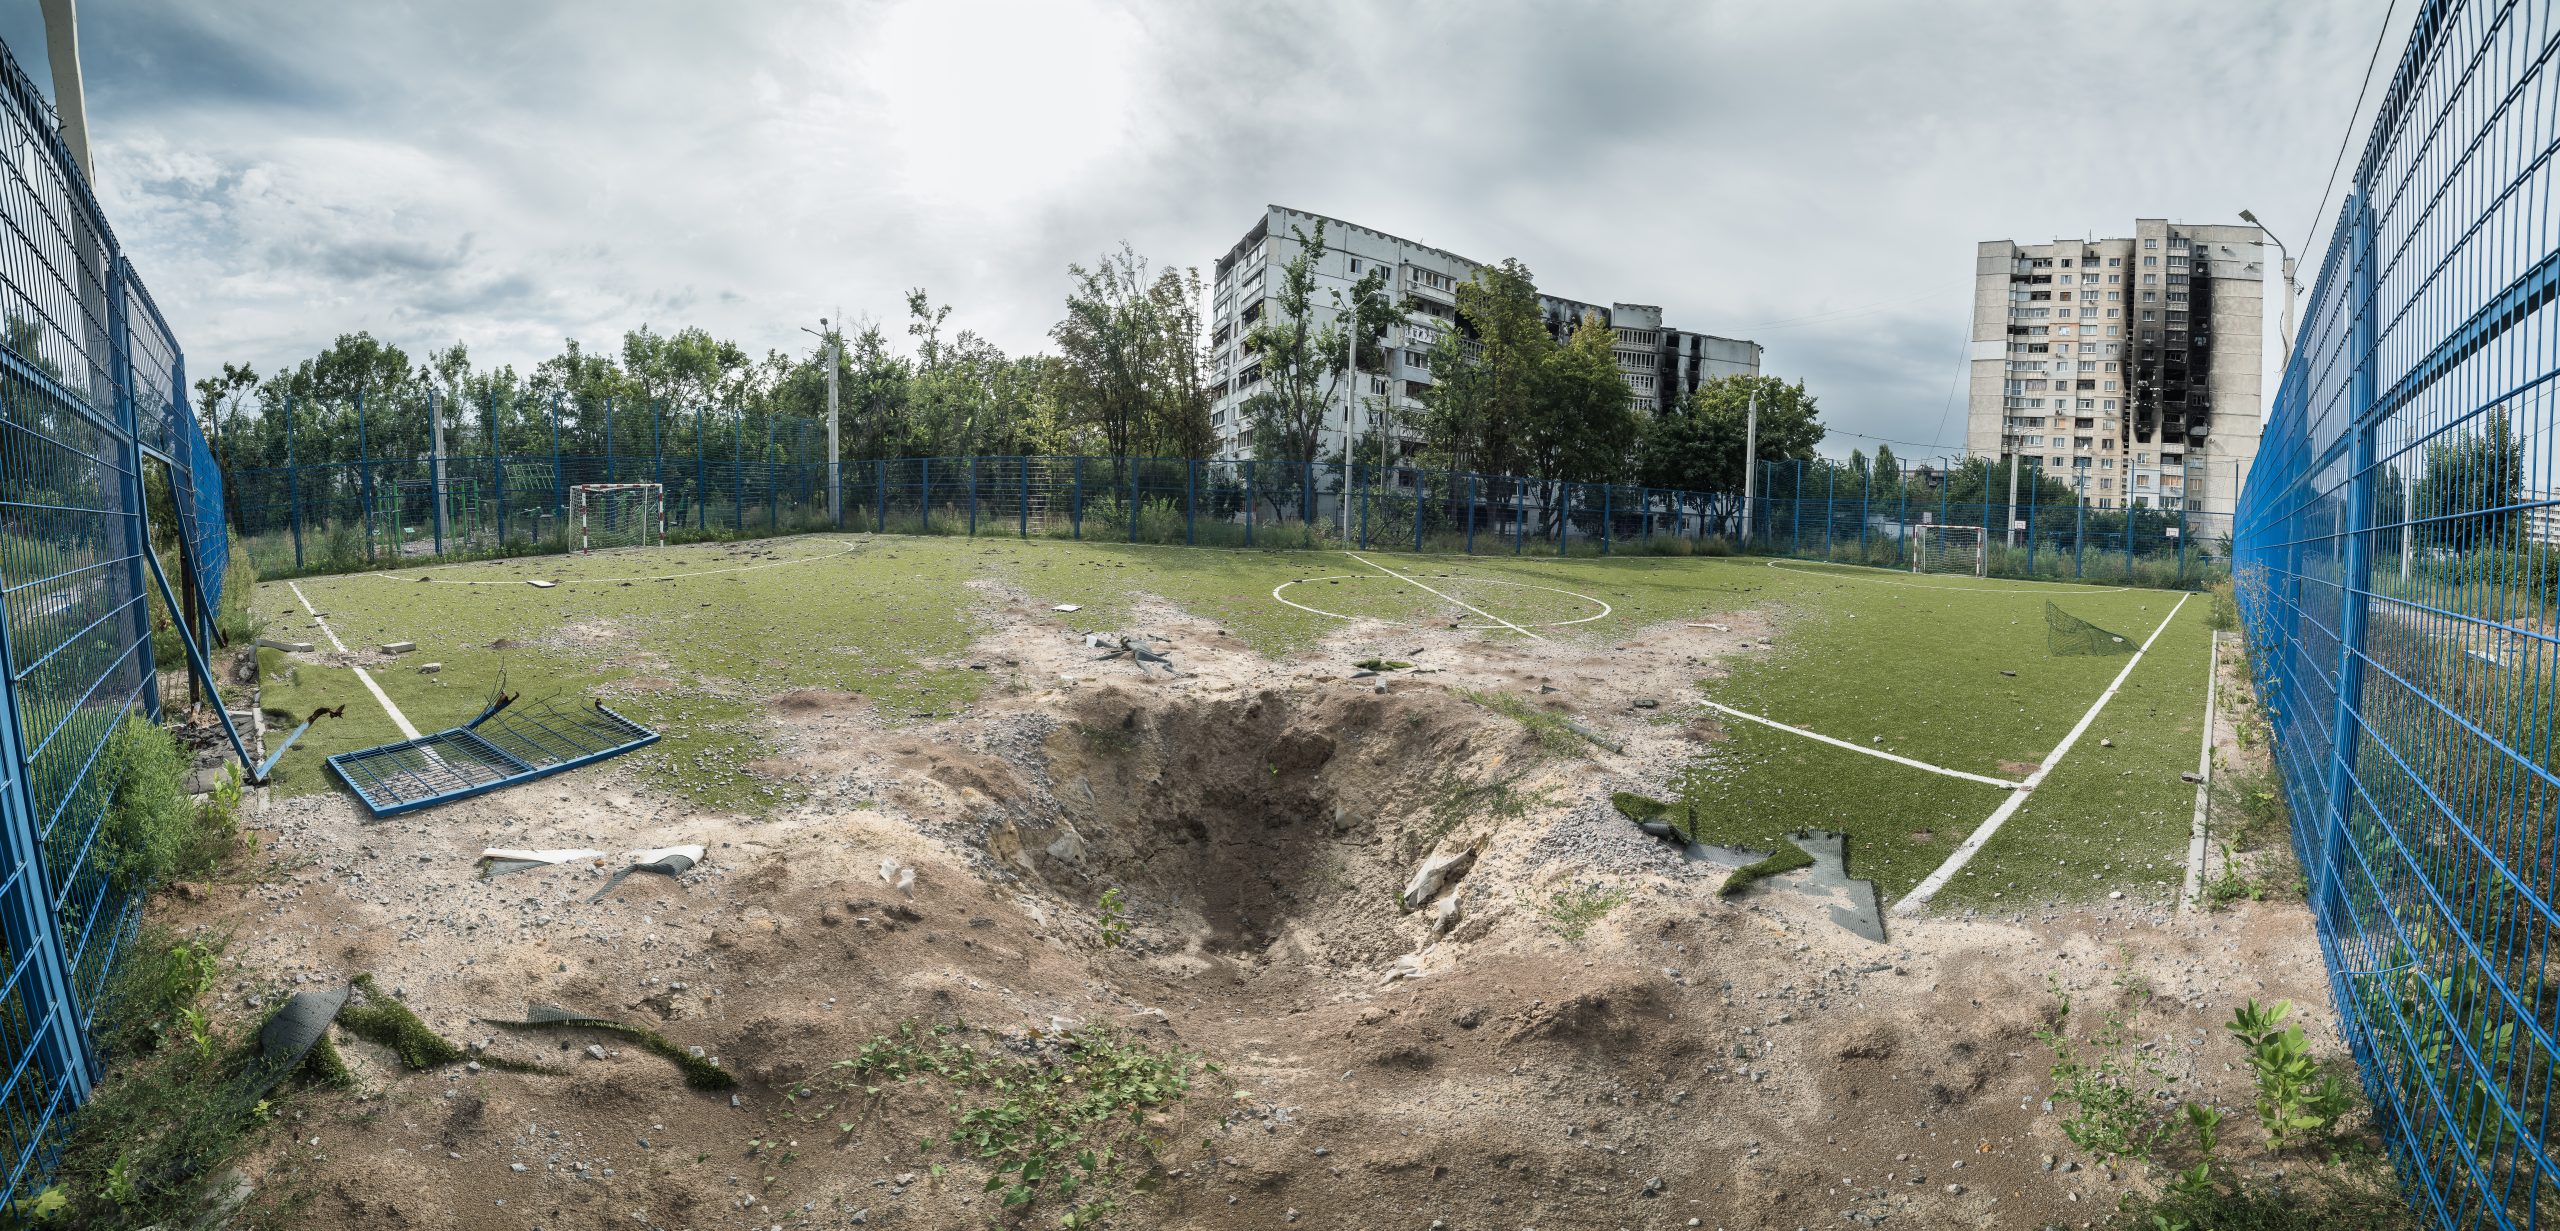 A crater on a football field in North Saltivka, Kharkiv.